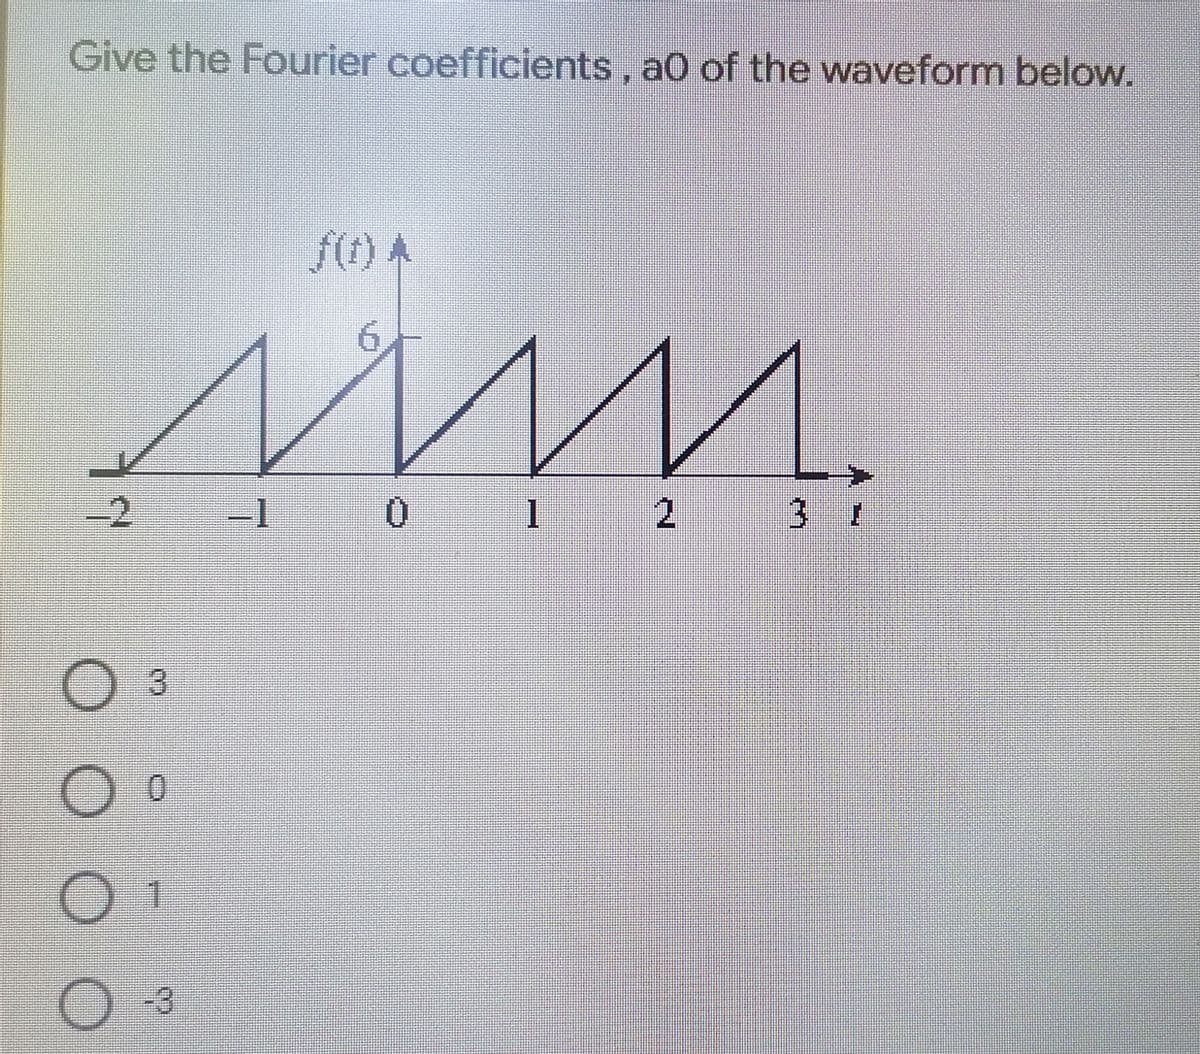 Give the Fourier coefficients, a0 of the waveform below.
f(t)A
6.
-1
1
2.
3 1
0.
1.
